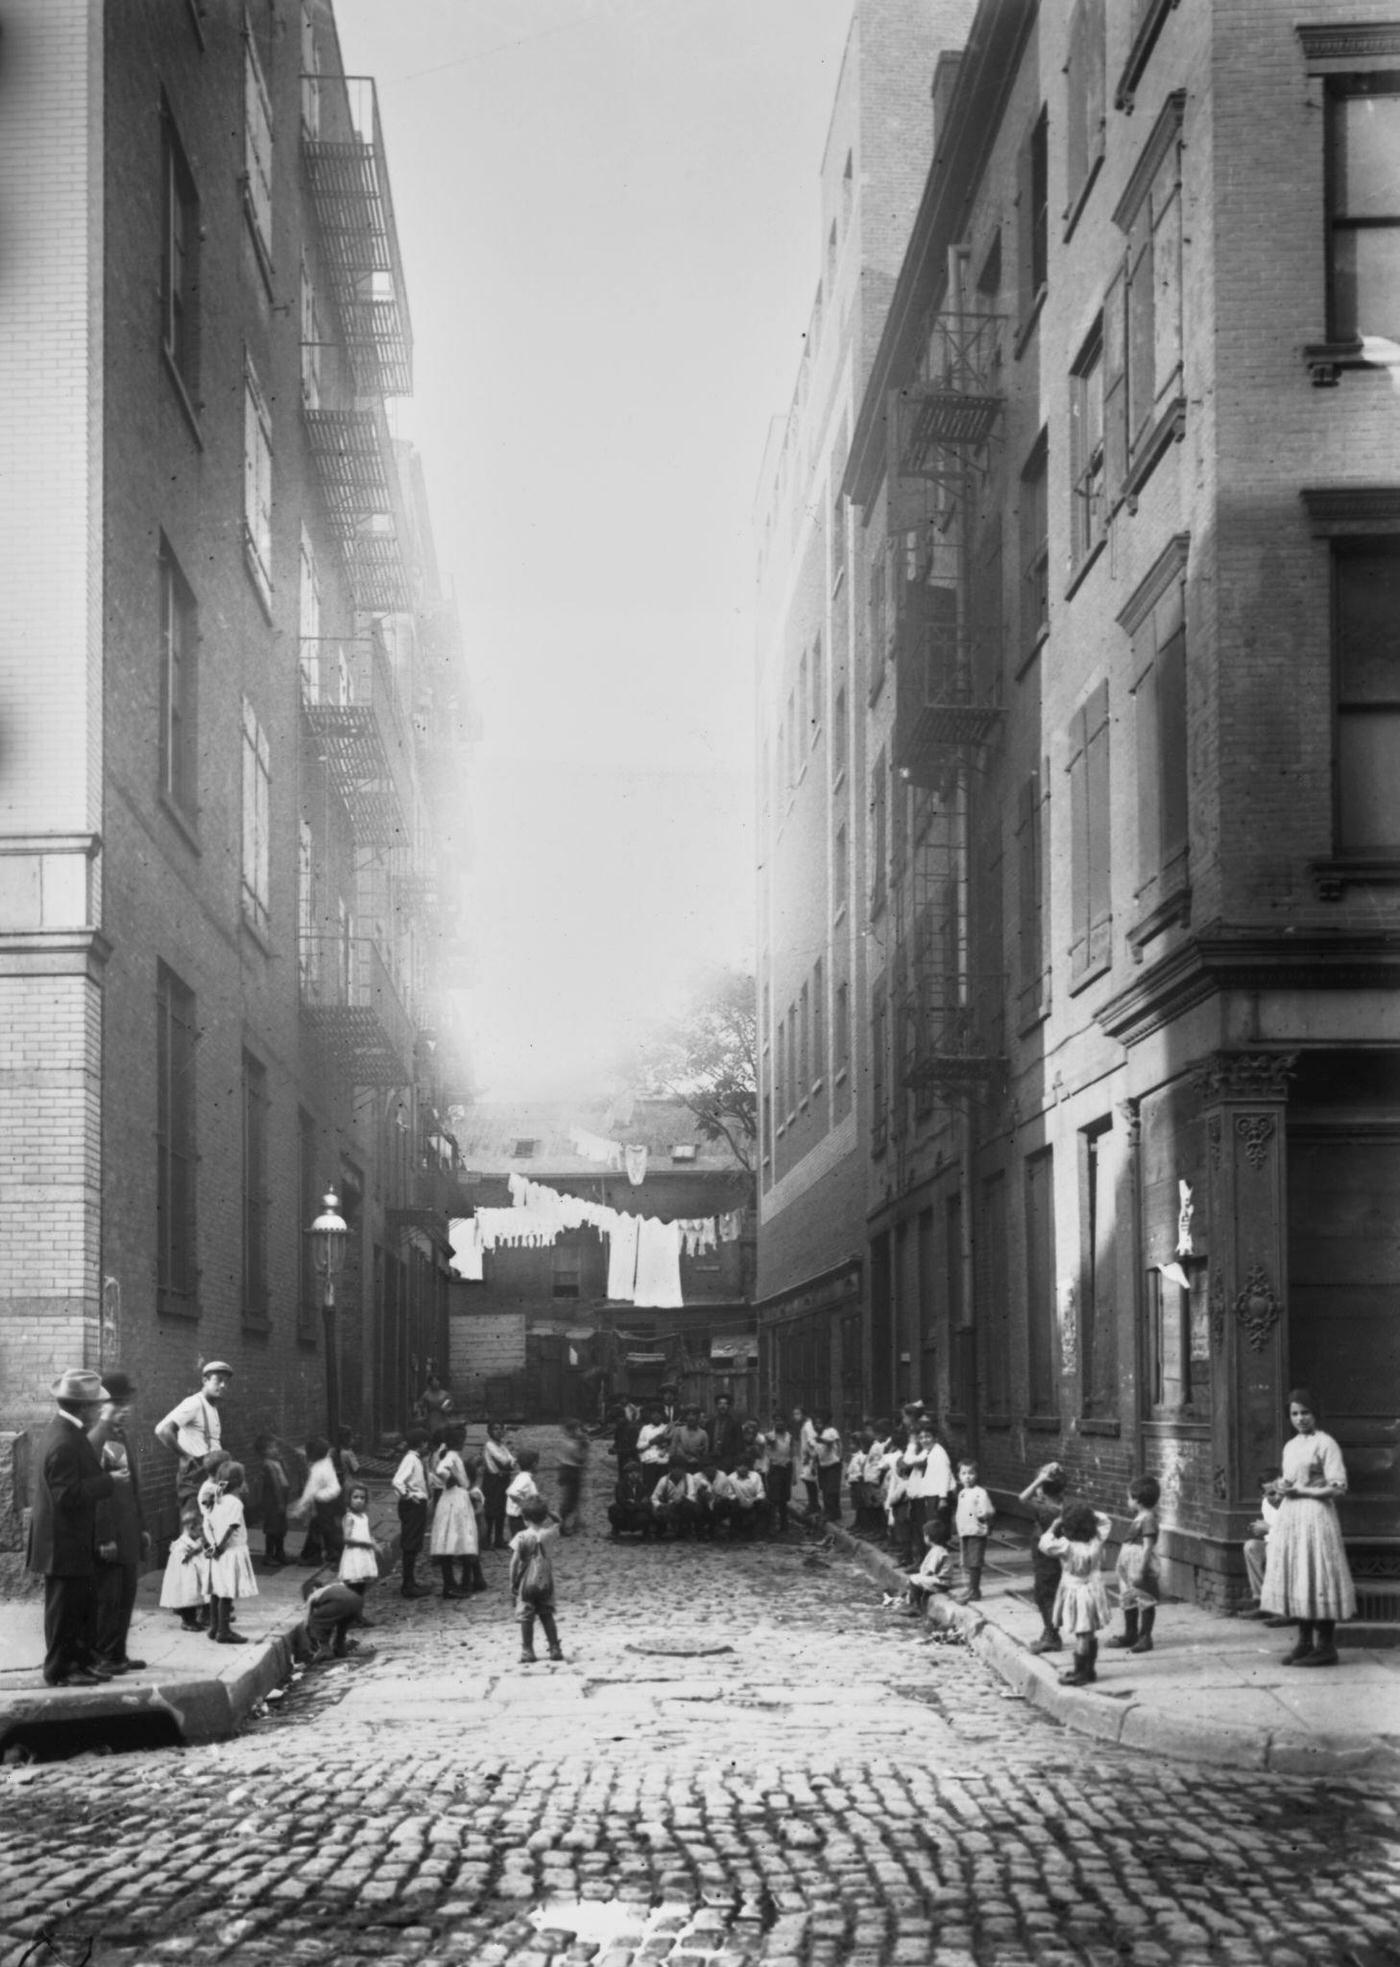 East Side Poverty In The Manhattan Borough Of New York City, August 1, 1913